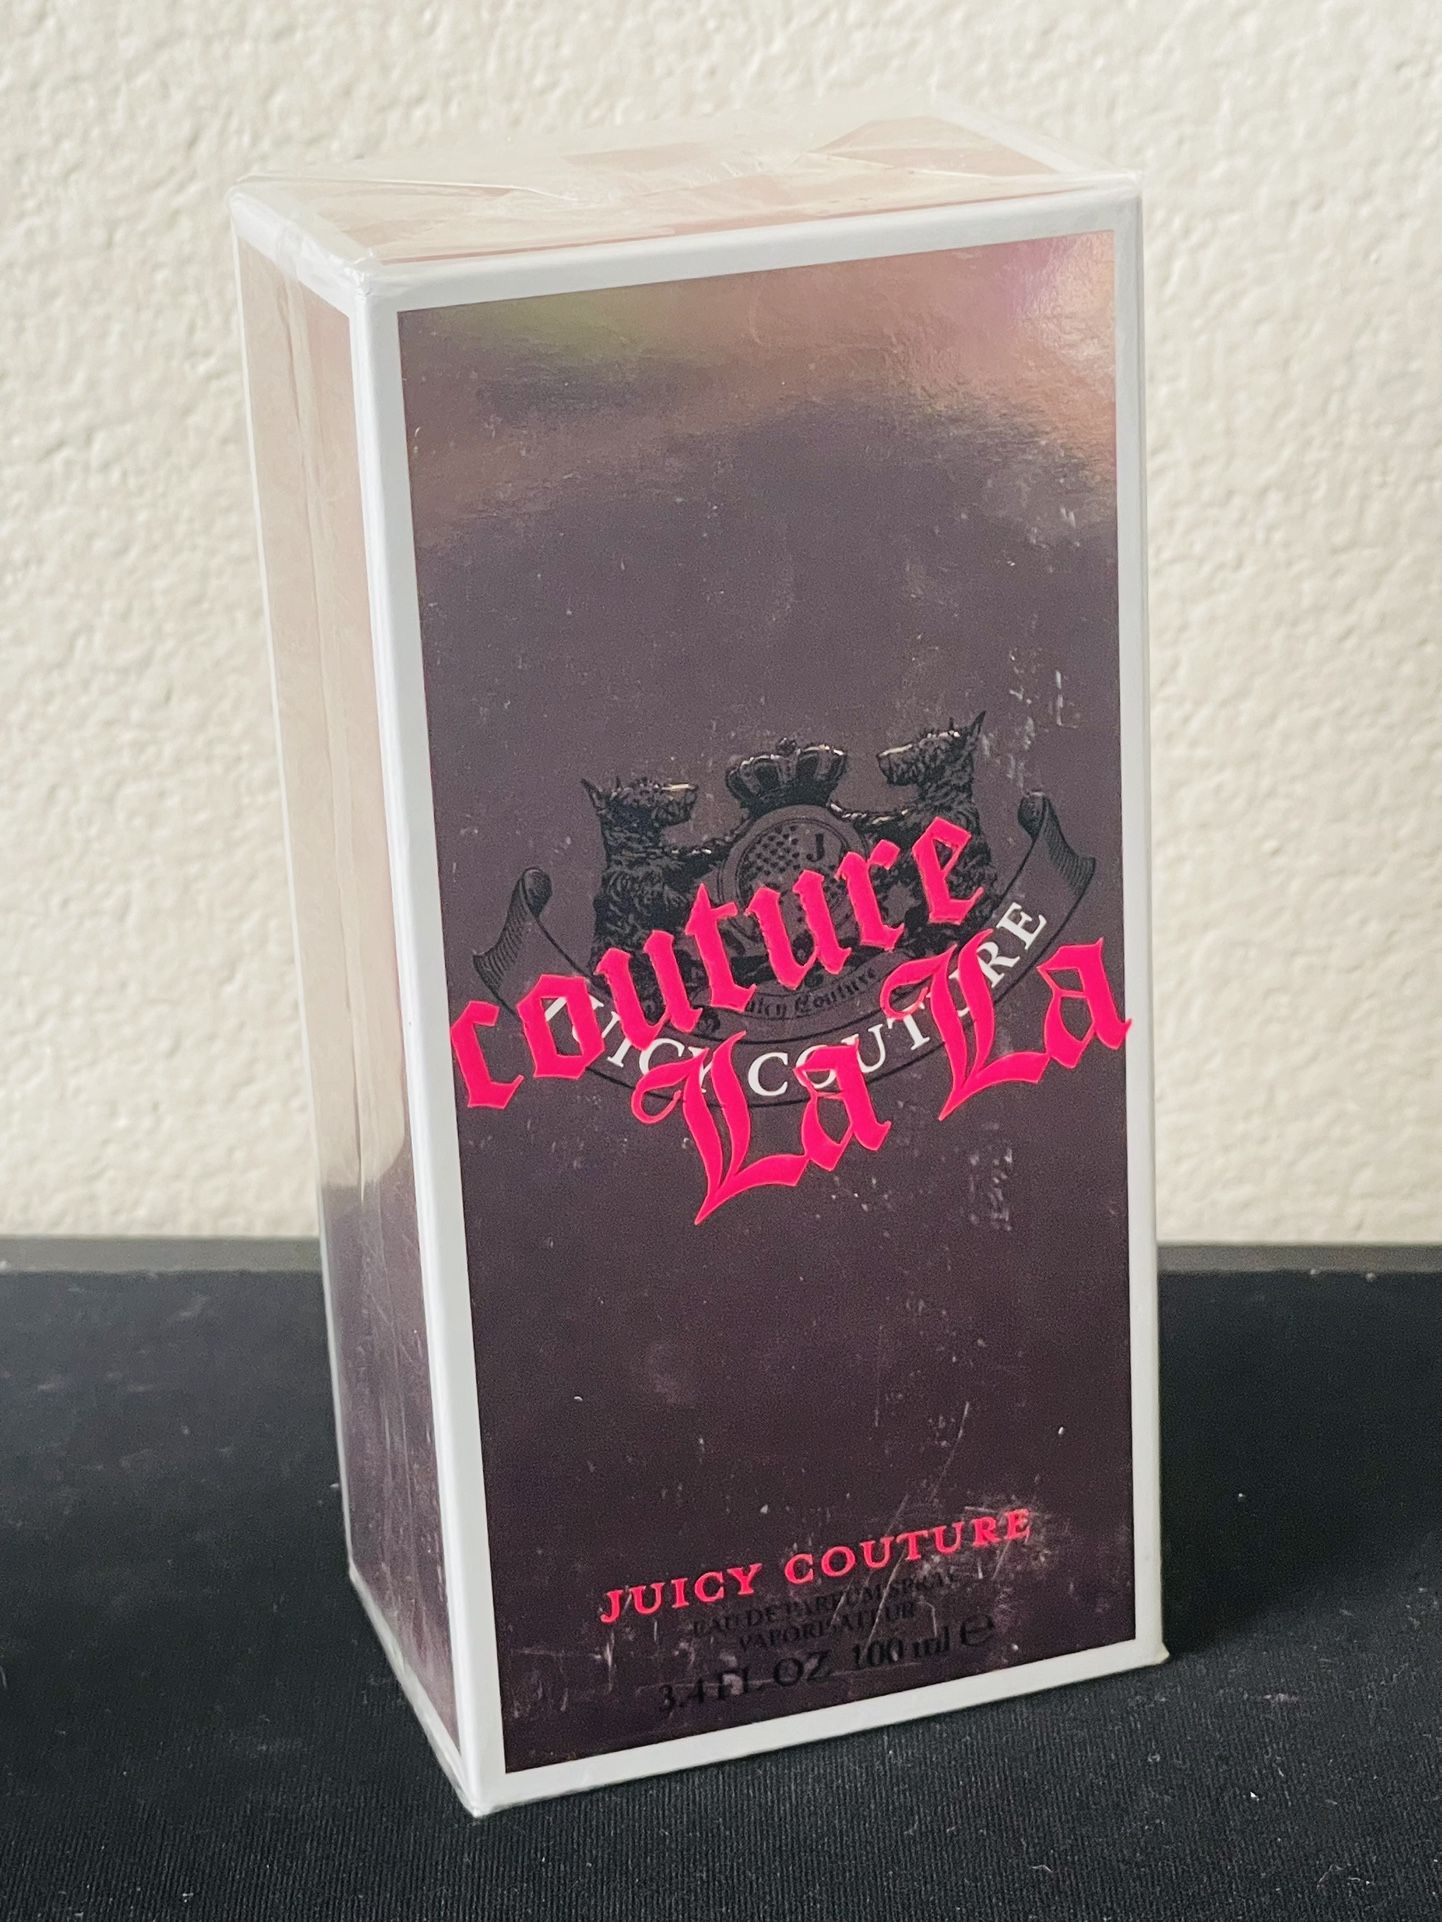 Perfume Juicy Couture